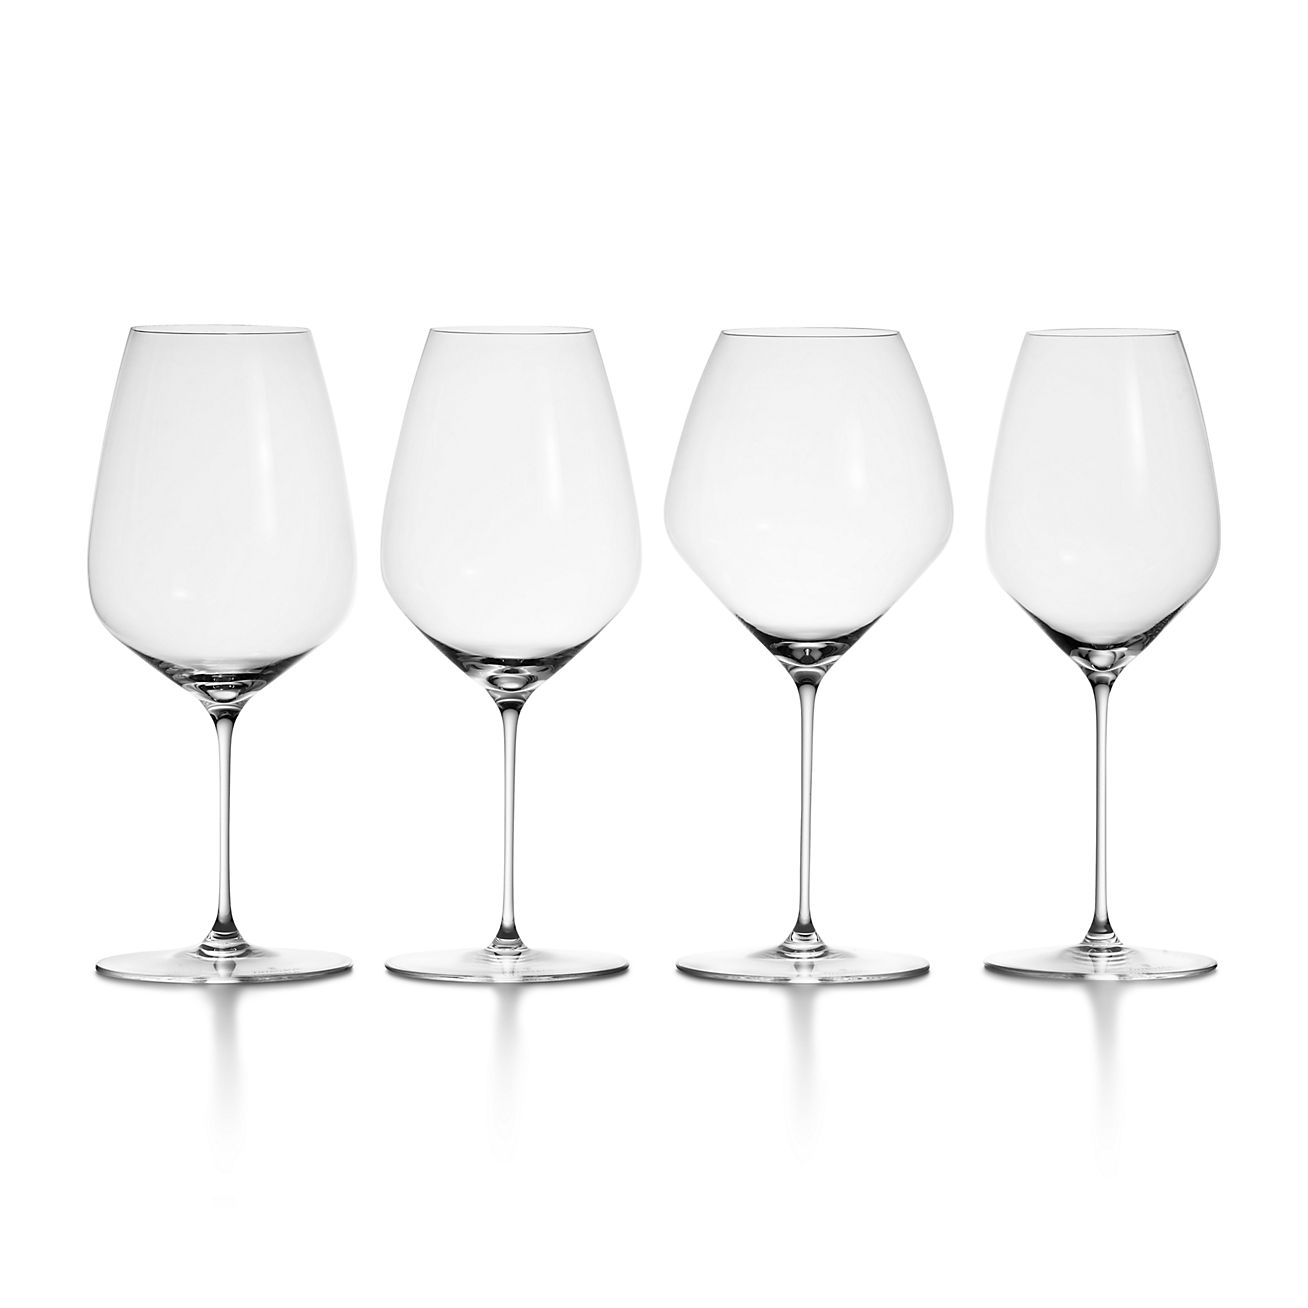 Tiffany Home Essentials All-Purpose White Wine Glasses in Crystal, Set of  Two